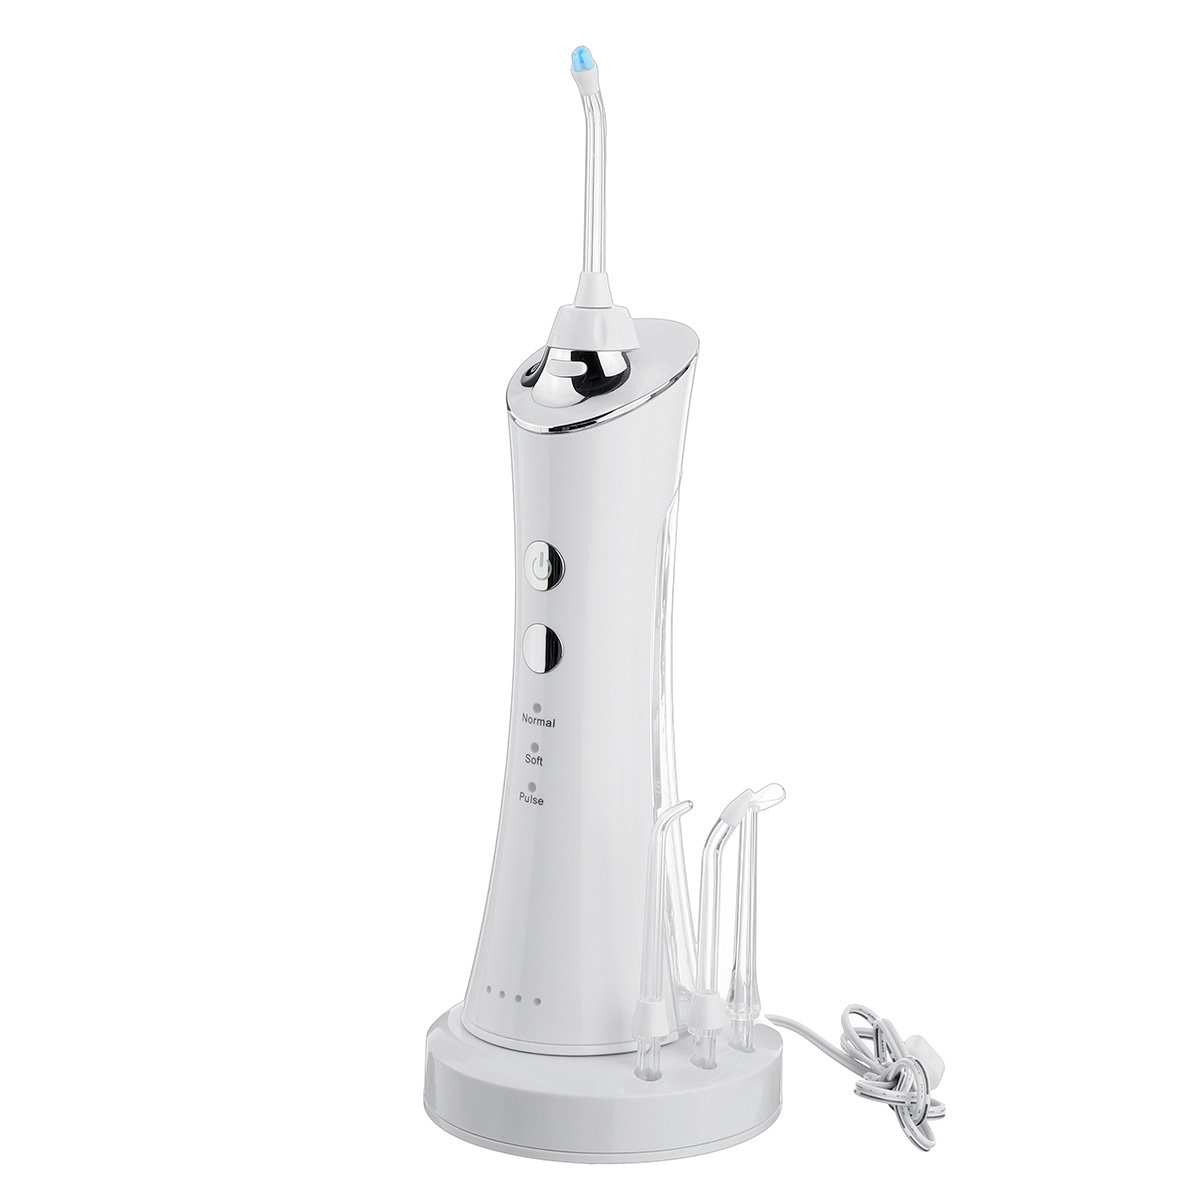 

3 Modes Portable Oral Irrigator Sensing Base Charging Water Dental Flosser Teeth Cleaner with 4 Heads Oral Care